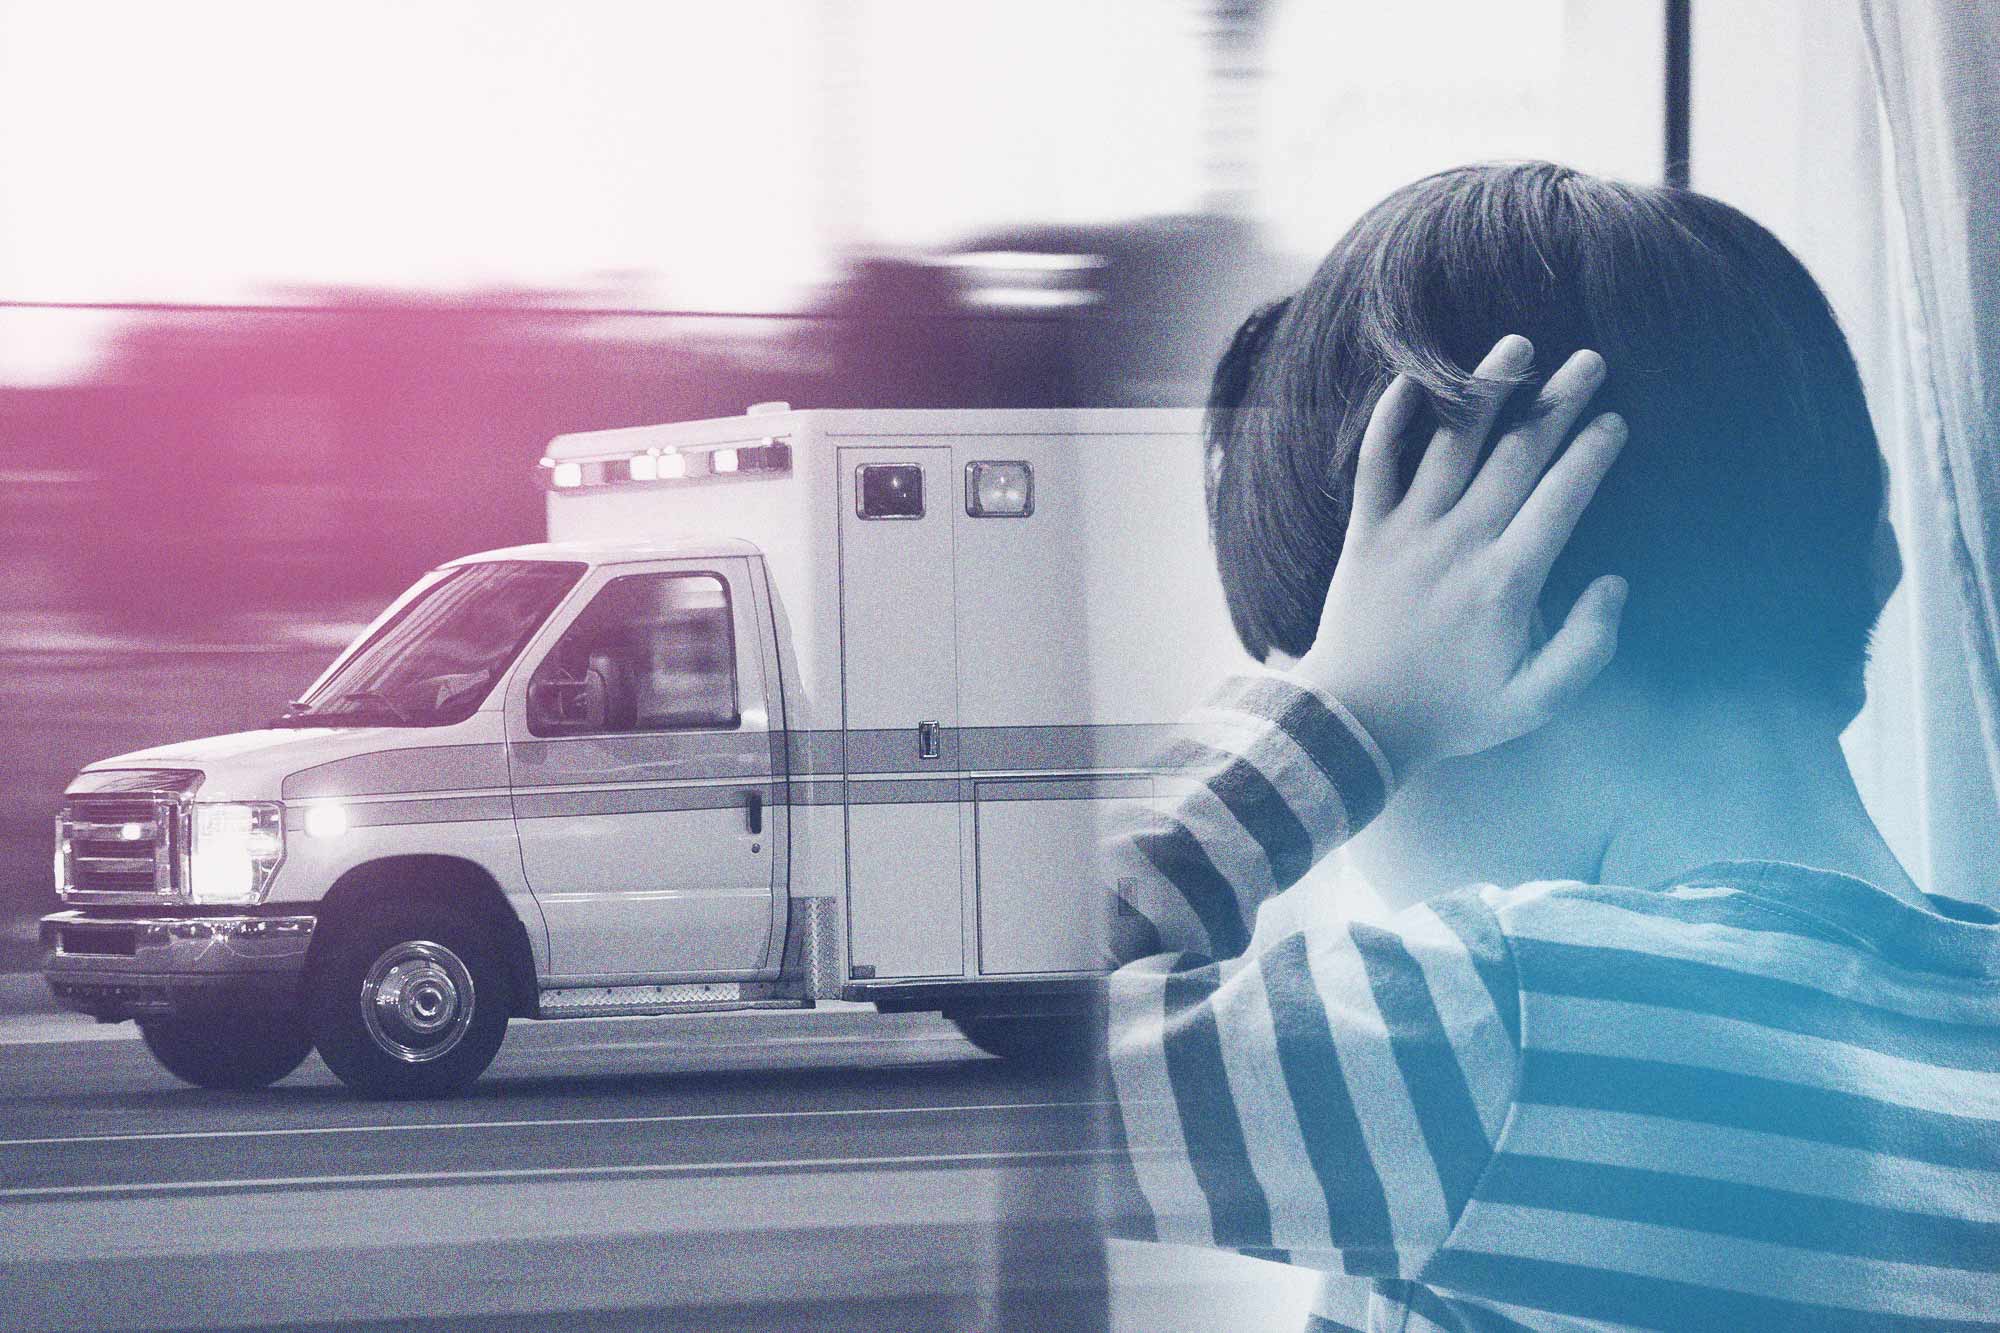 Illustration of a child covering their ears at the sound of an ambulance